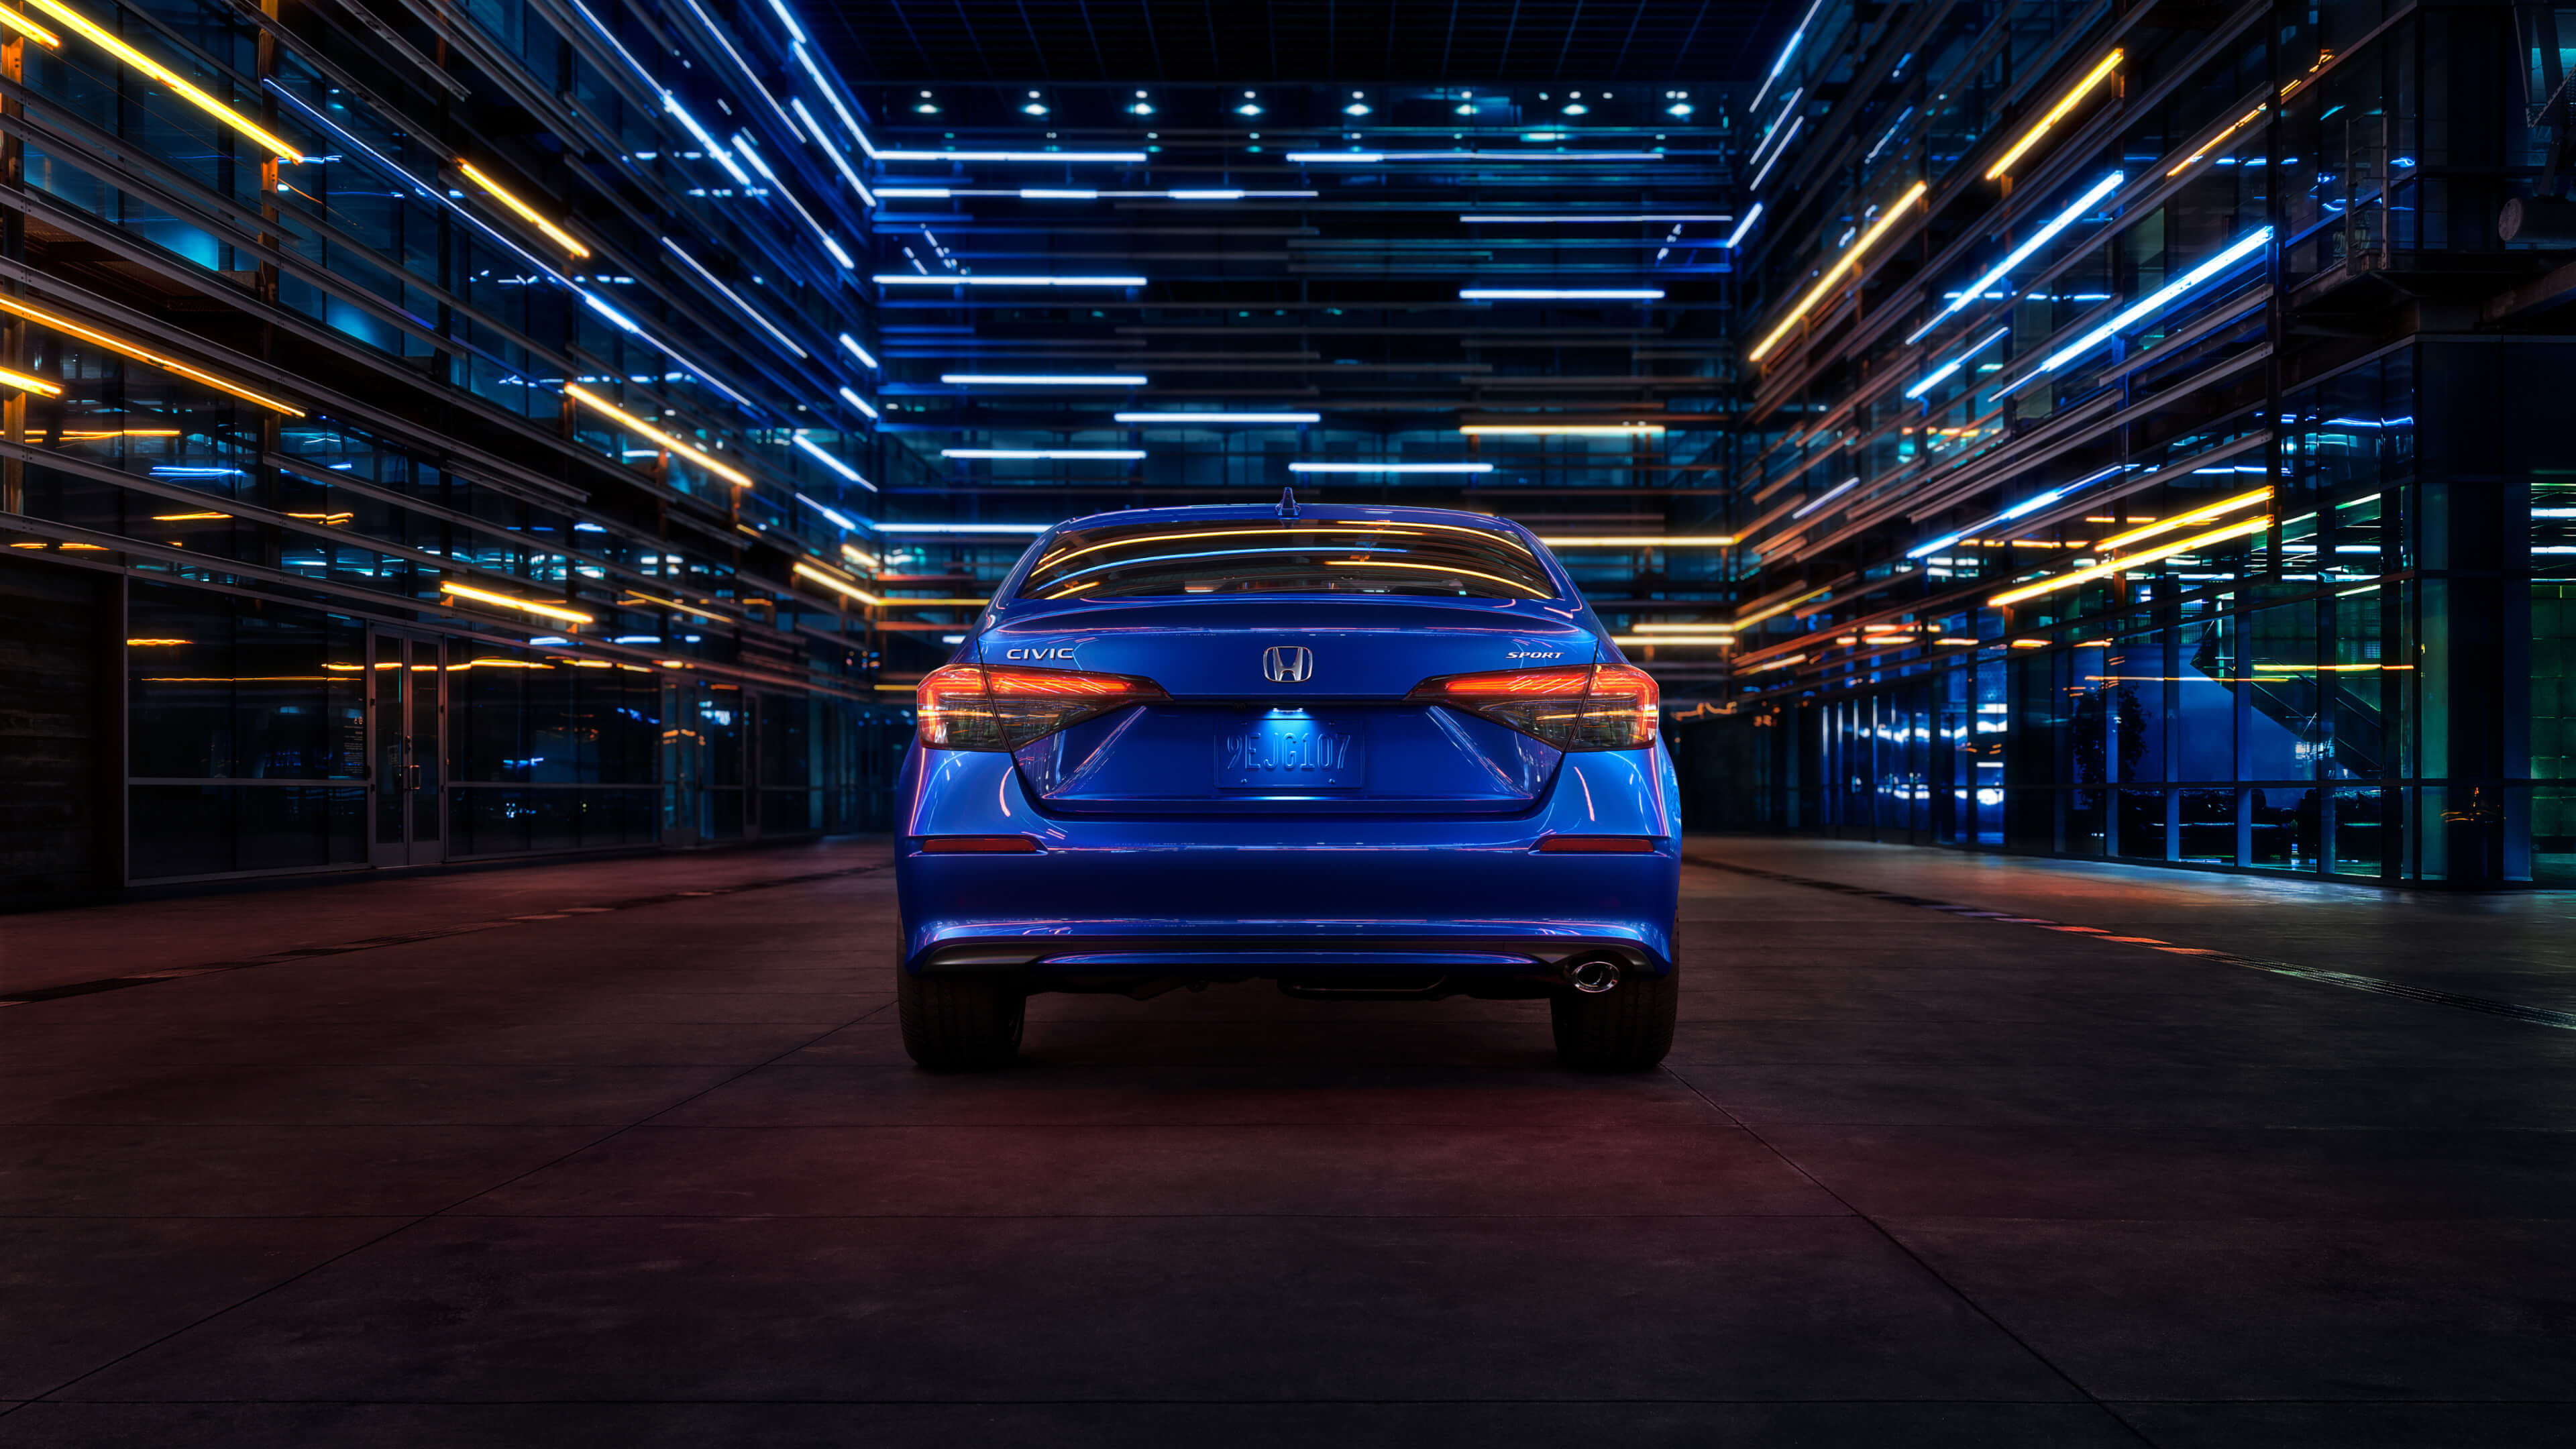 Rear view of a blue 2022 Honda Civic driving at night through a city street illuminated by blue and white lights emanating from the surrounding buildings.